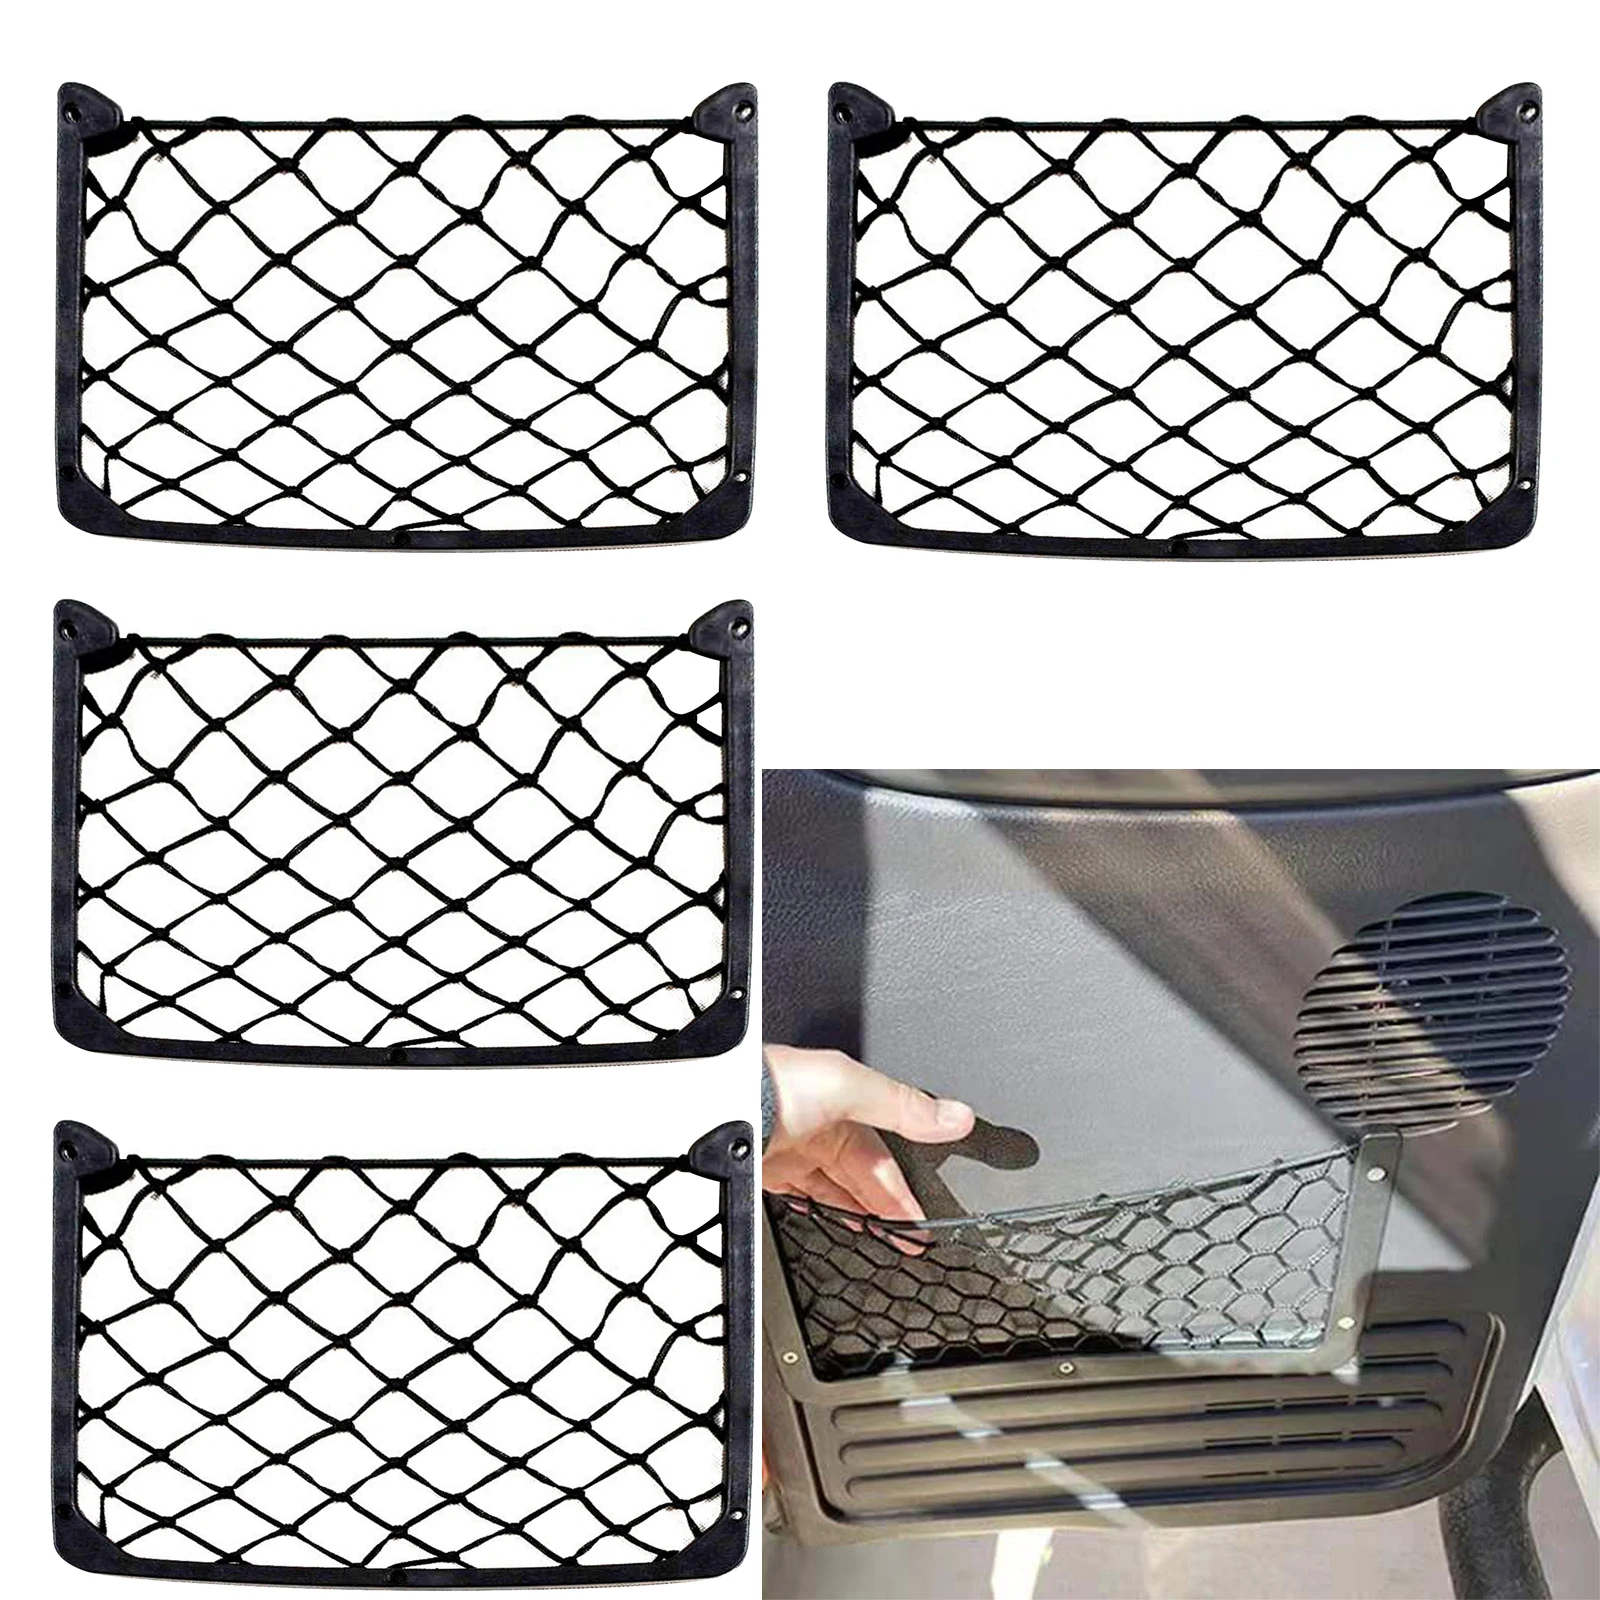 Car Storage Net Large Size ABS Plastic Netting Bag for Car Frame Stretch Mesh Net Universal Cargo with Screws for RV Car Trunk 1pcs 80mm 90mm dustproof aluminum mesh 9025 9225 chassis cool fan metal dustproof mesh cover with screws 3d printer parts